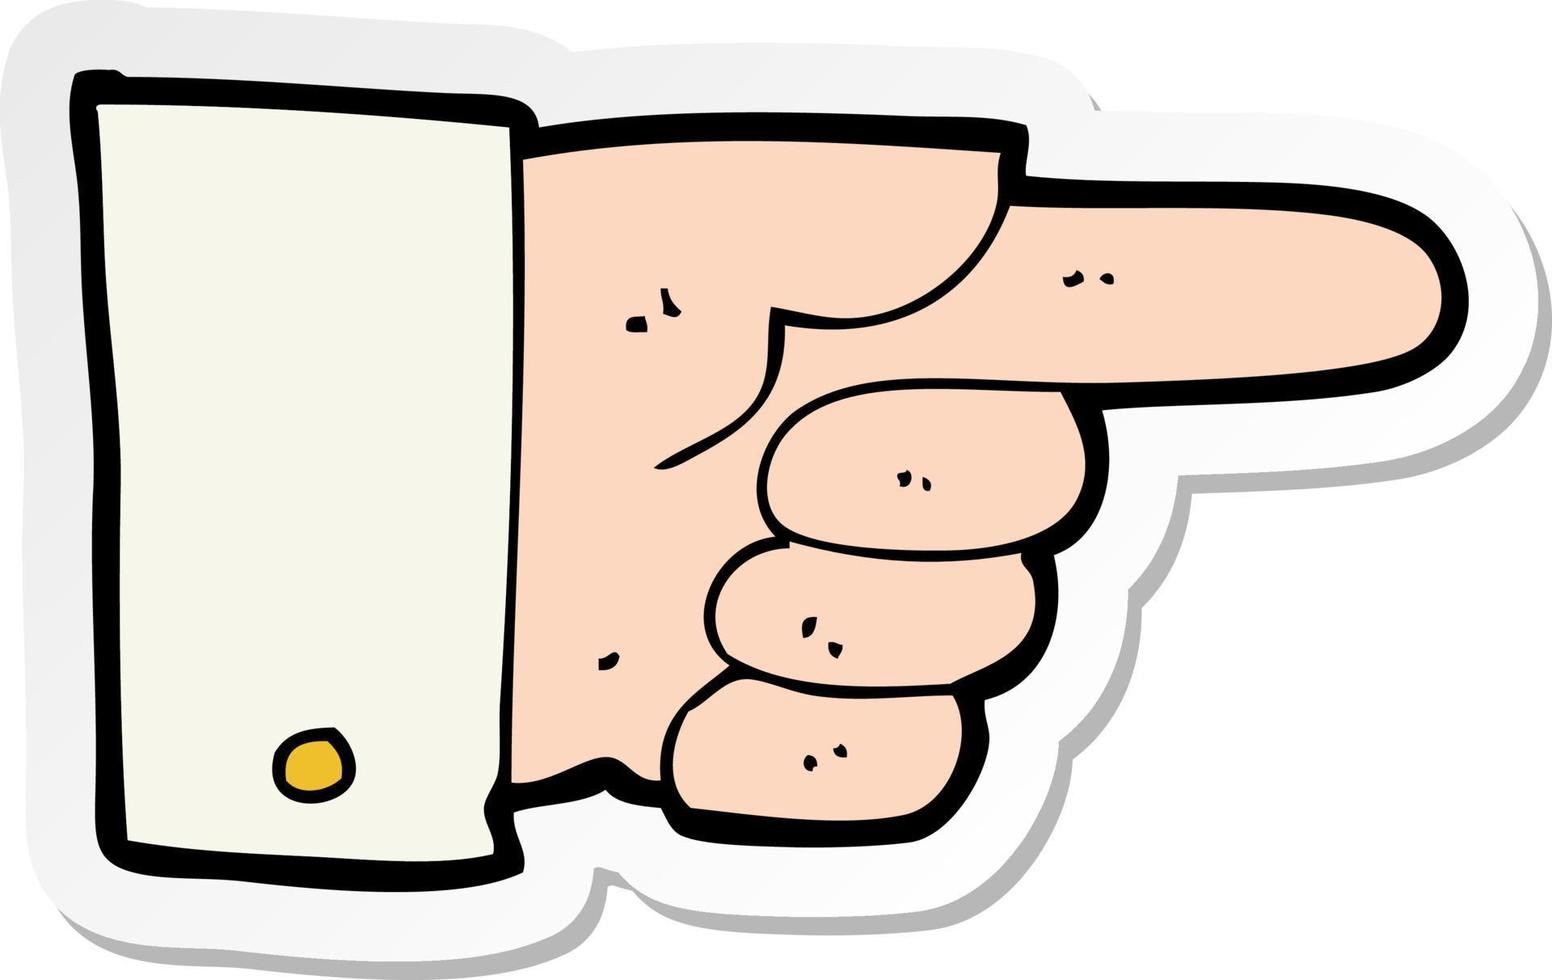 sticker of a cartoon pointing hand vector